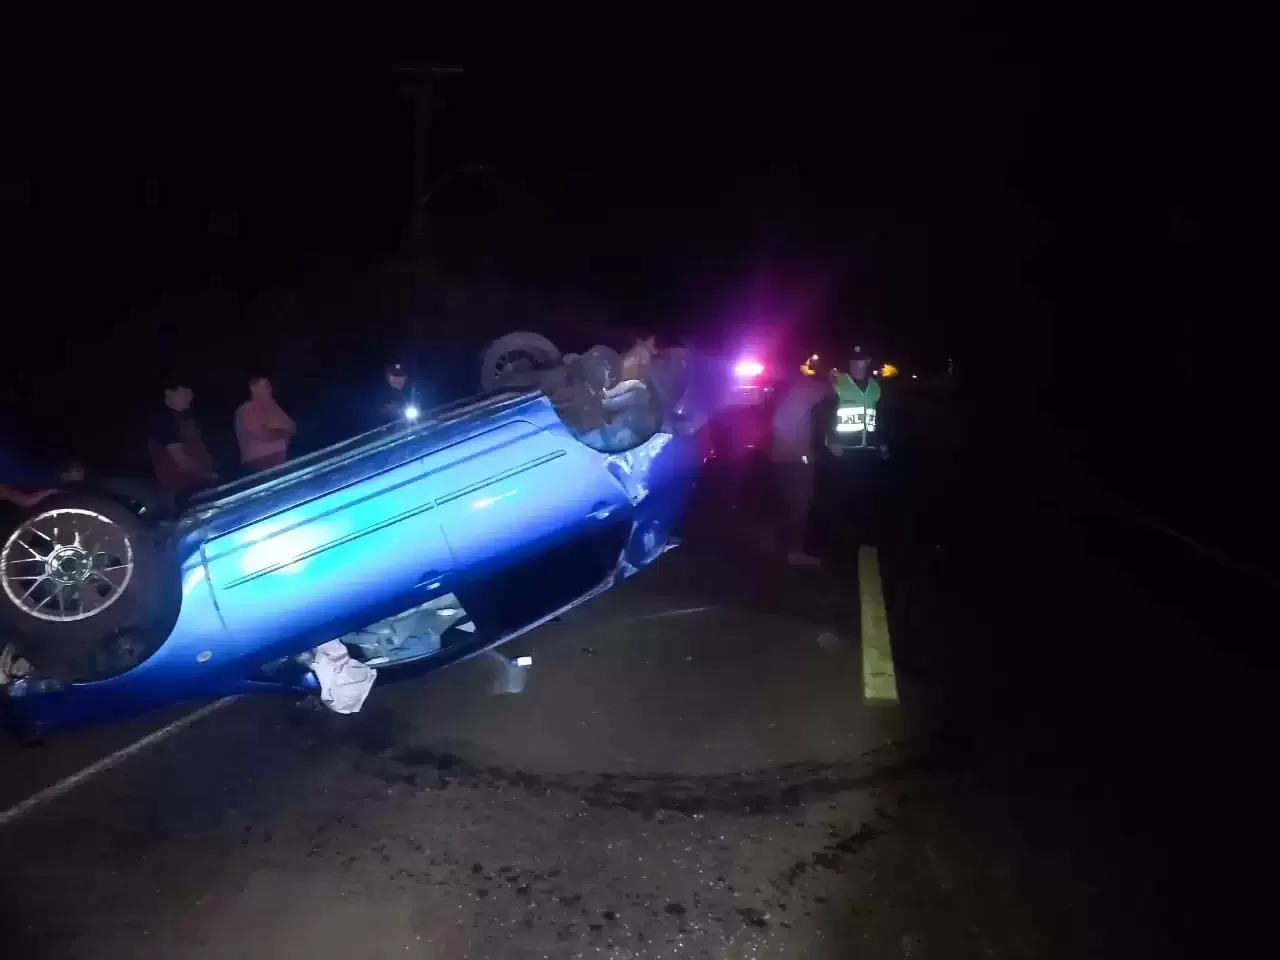 Drunk driver loses control of his vehicle and overturns spectacularly
